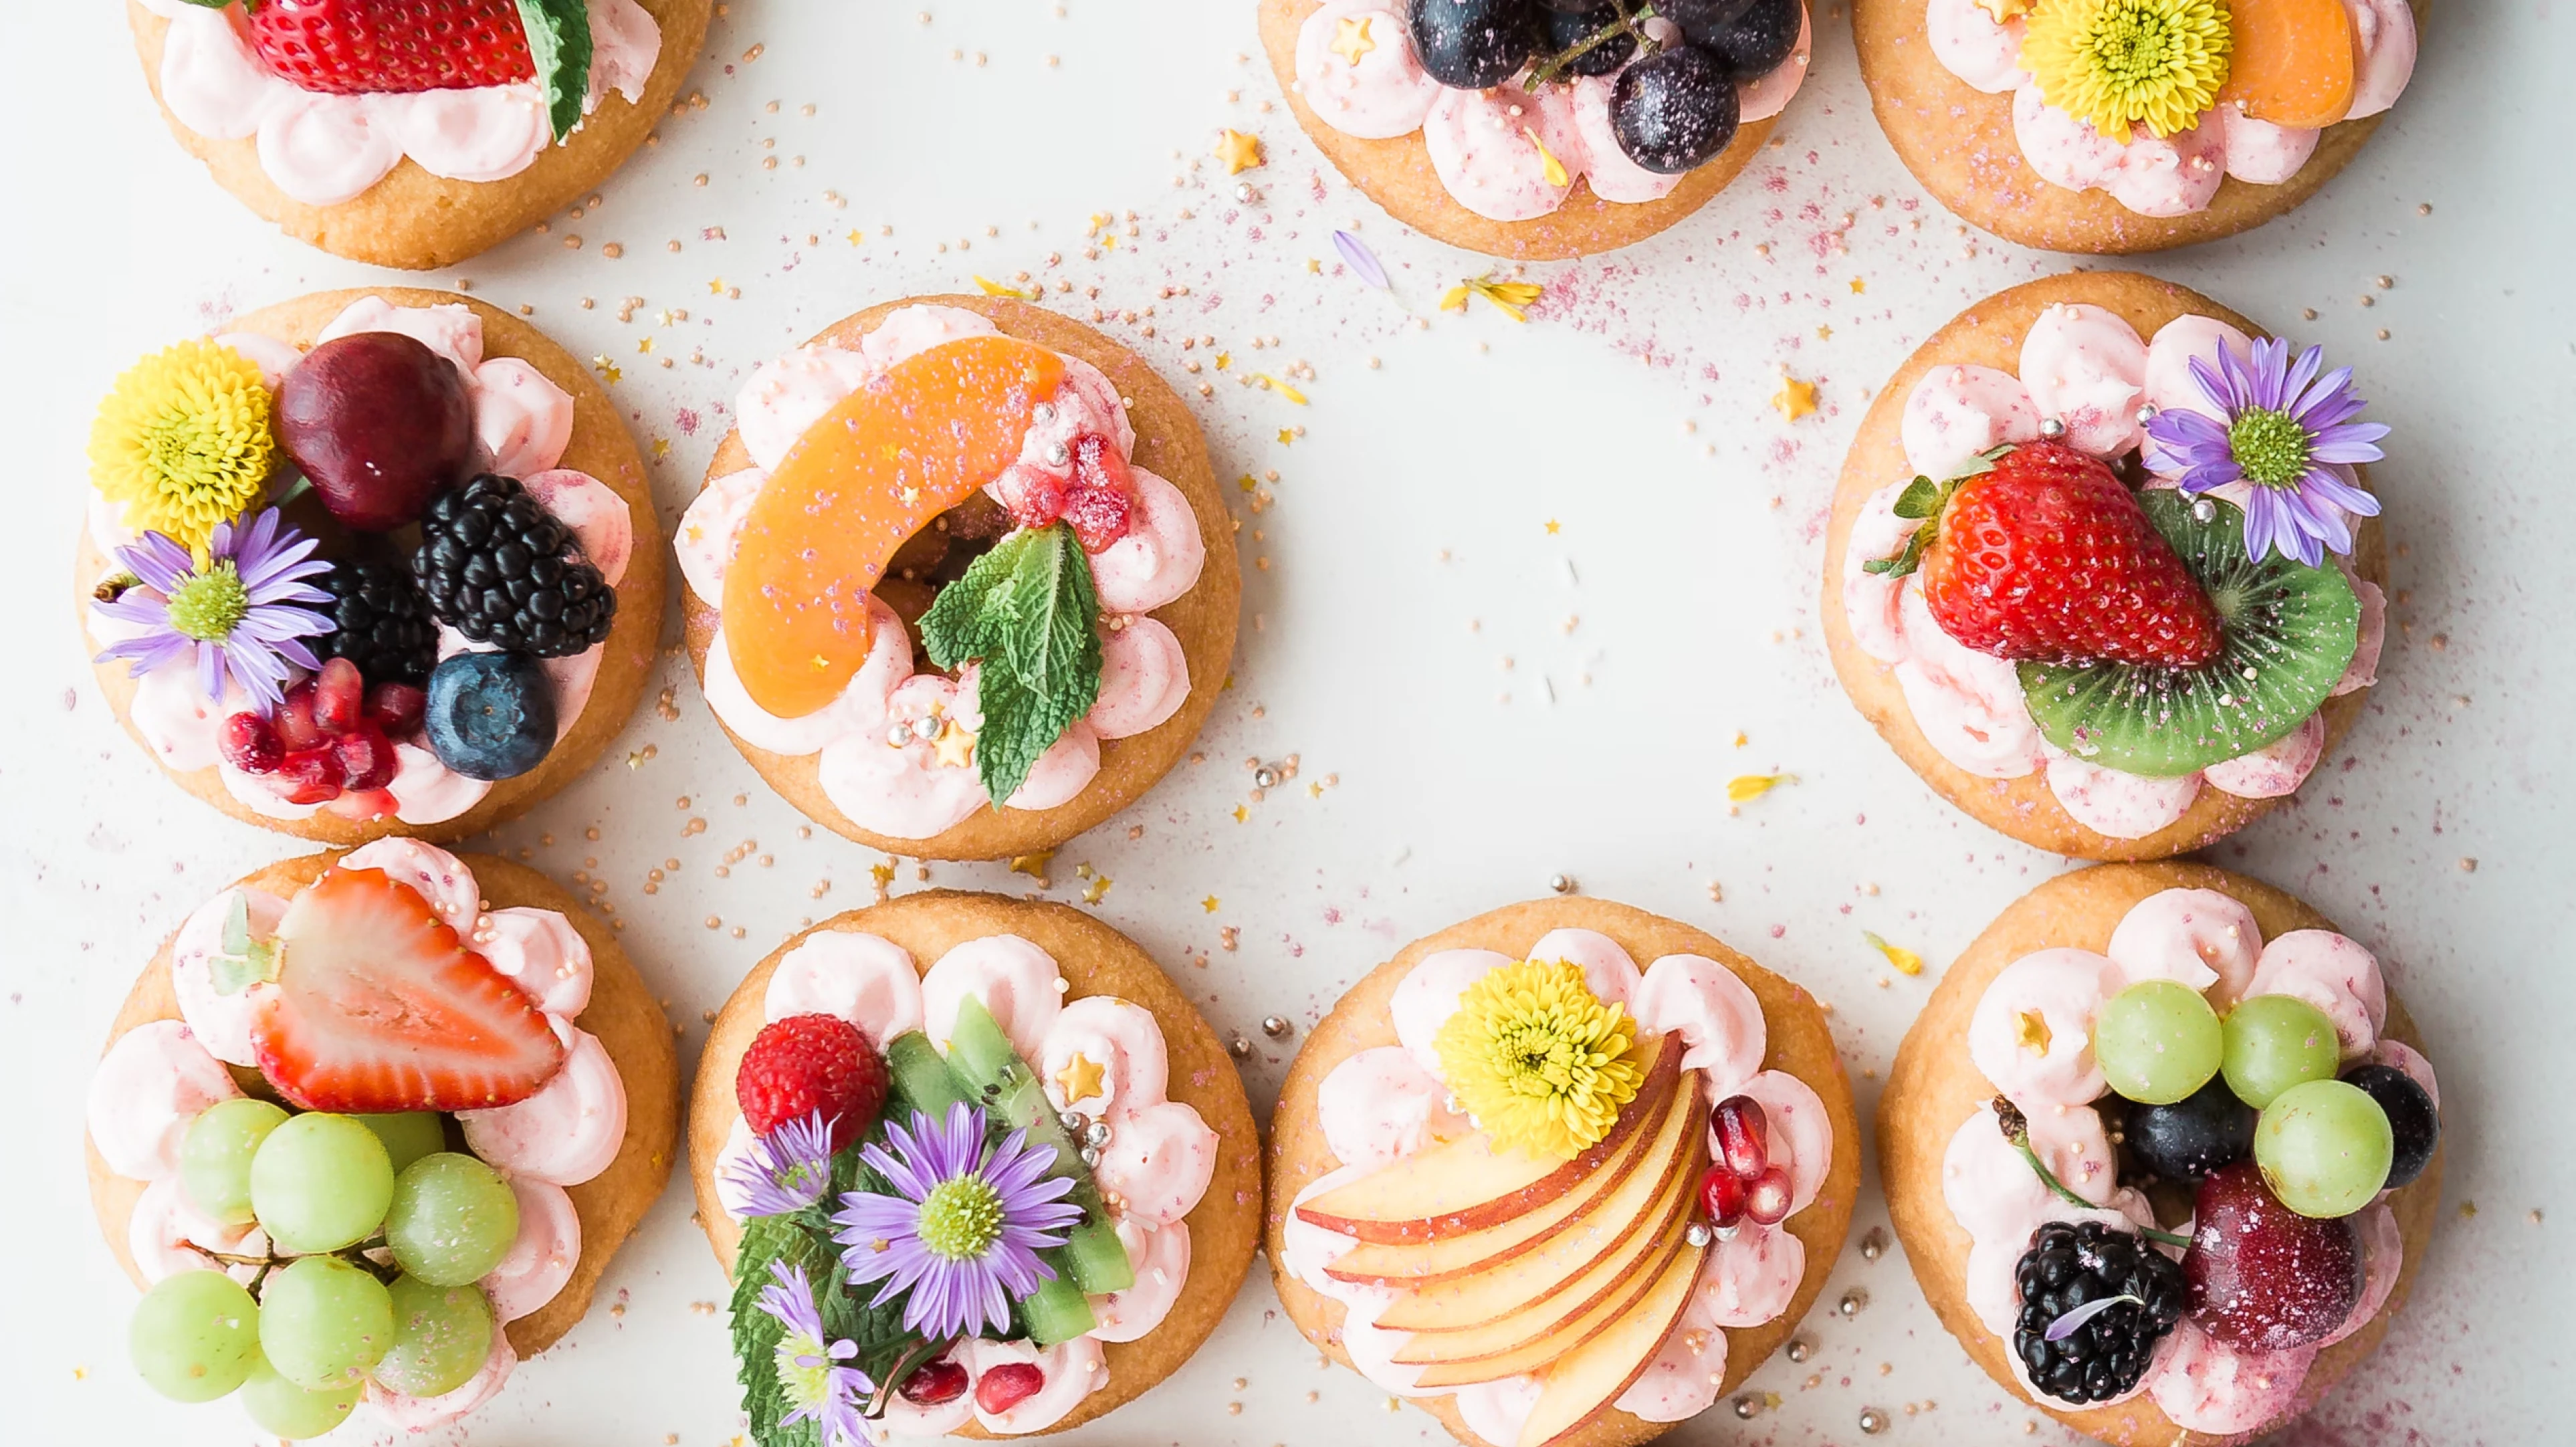 Mother's Day Dessert Inspiration: Crafting a Winning Menu for Your Pastry Shop